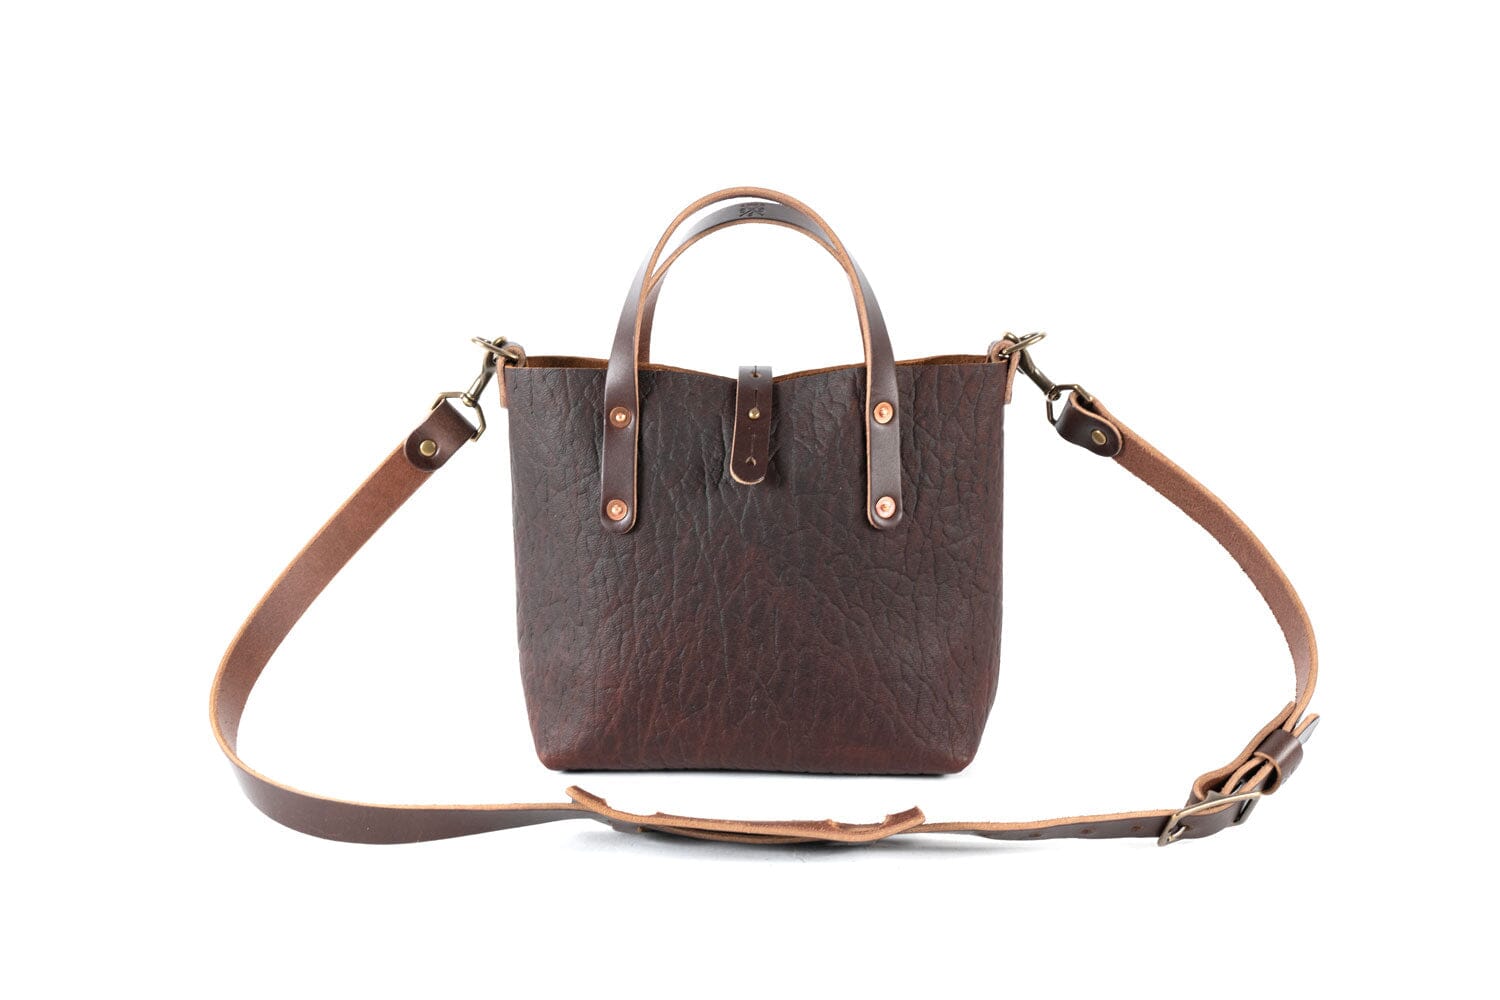 AVERY LEATHER TOTE BAG - MINI CROSSBODY - CHERRY BISON